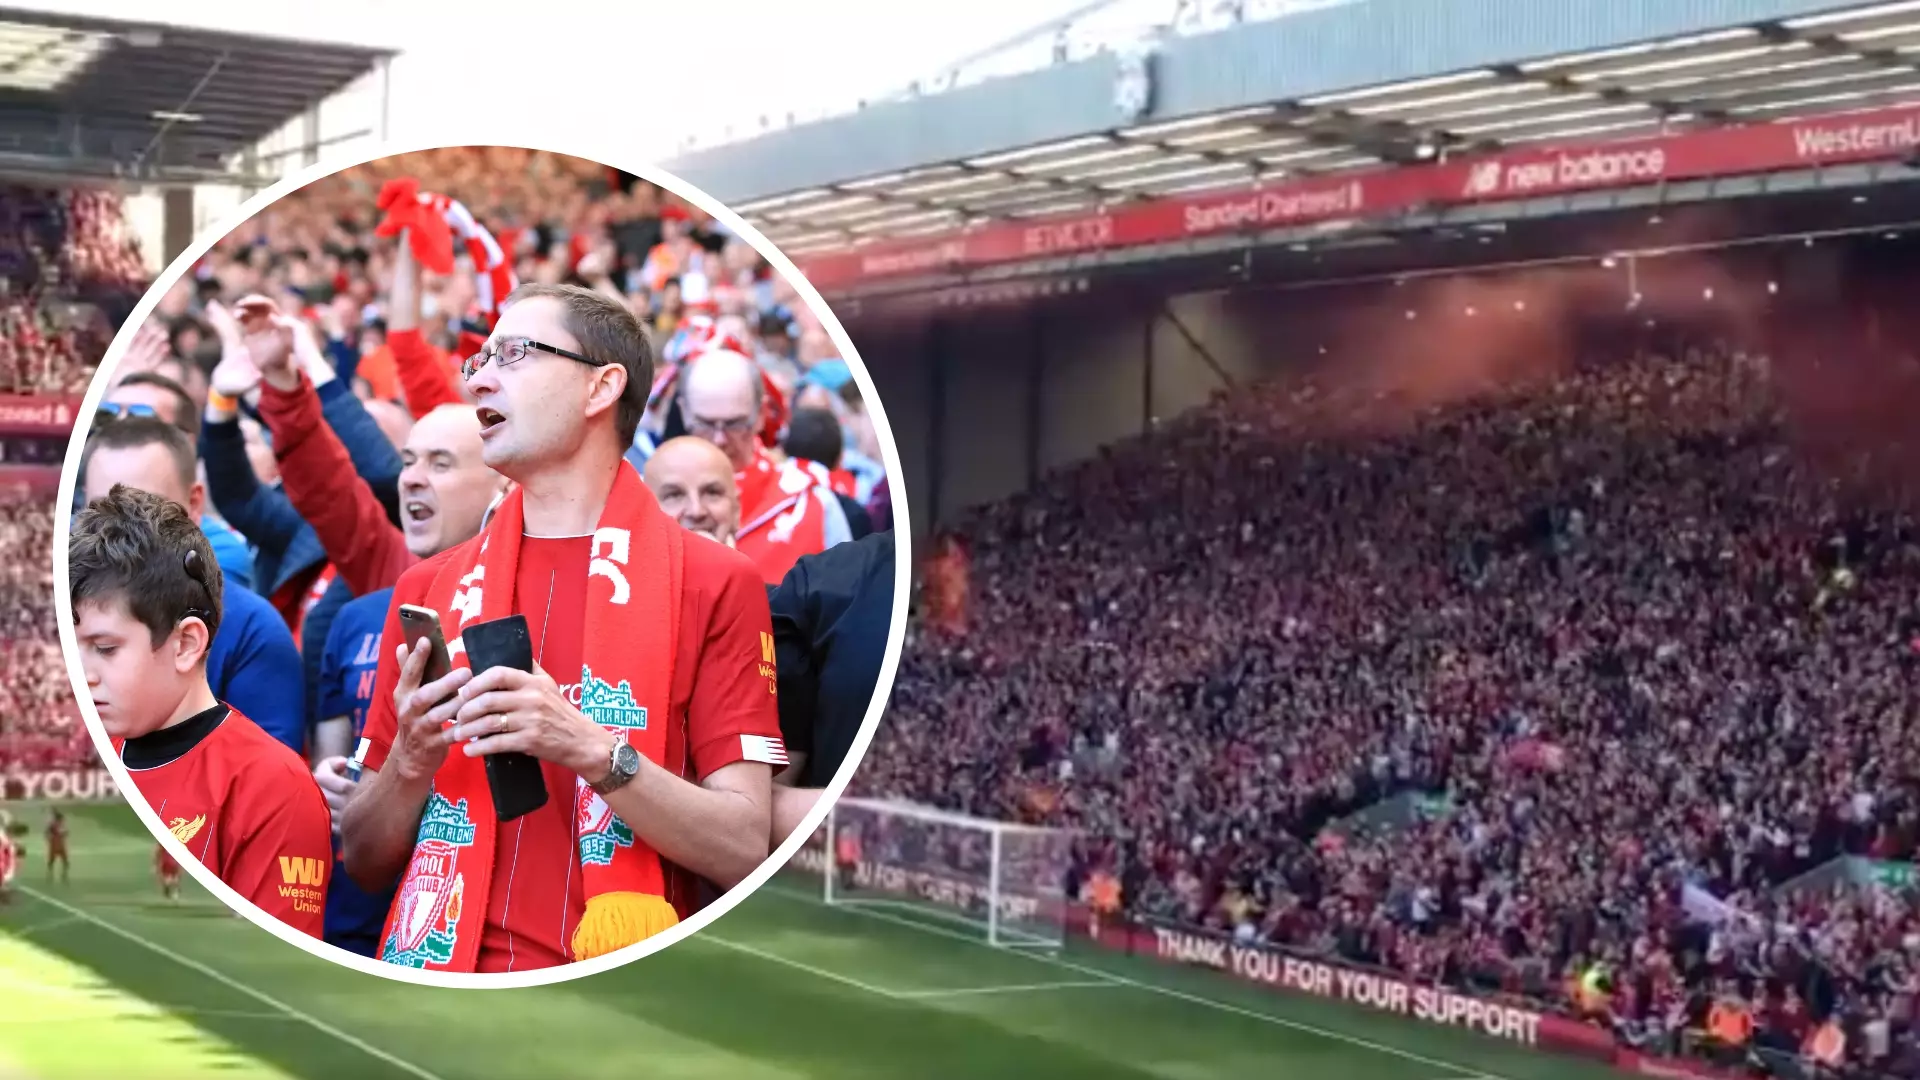 Liverpool Fans Create A Spine-Tingling Atmosphere At Anfield After Wolves Match